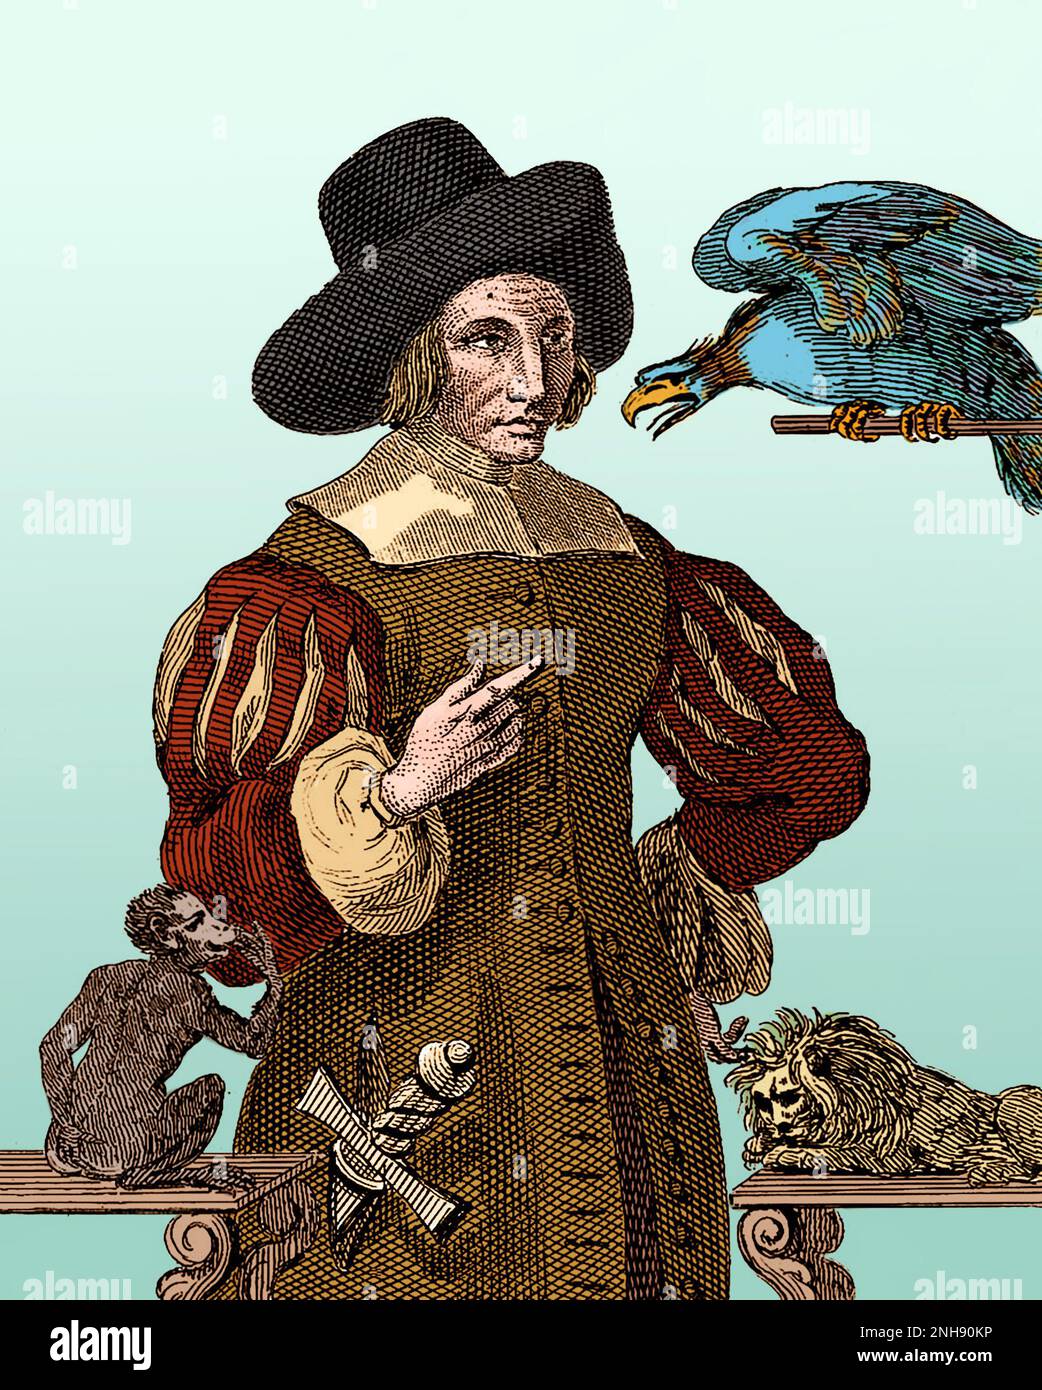 Mary Frith (c. 1584-1659), also known as Moll (or Mal) Cutpurse, was a notorious pickpocket and fence of the London underworld. She wore men's clothing, kept parrots, bred mastiffs, and was the first English woman known to smoke.  Several plays were written about her during her lifetime. The Life of Mrs Mary Frith, a sensationalized biography written three years after her death, helped to mythologize her. From 'Collection of four hundred portraits of remarkable, eccentric and notorious personages,' circa 1880. Colorized. Stock Photo